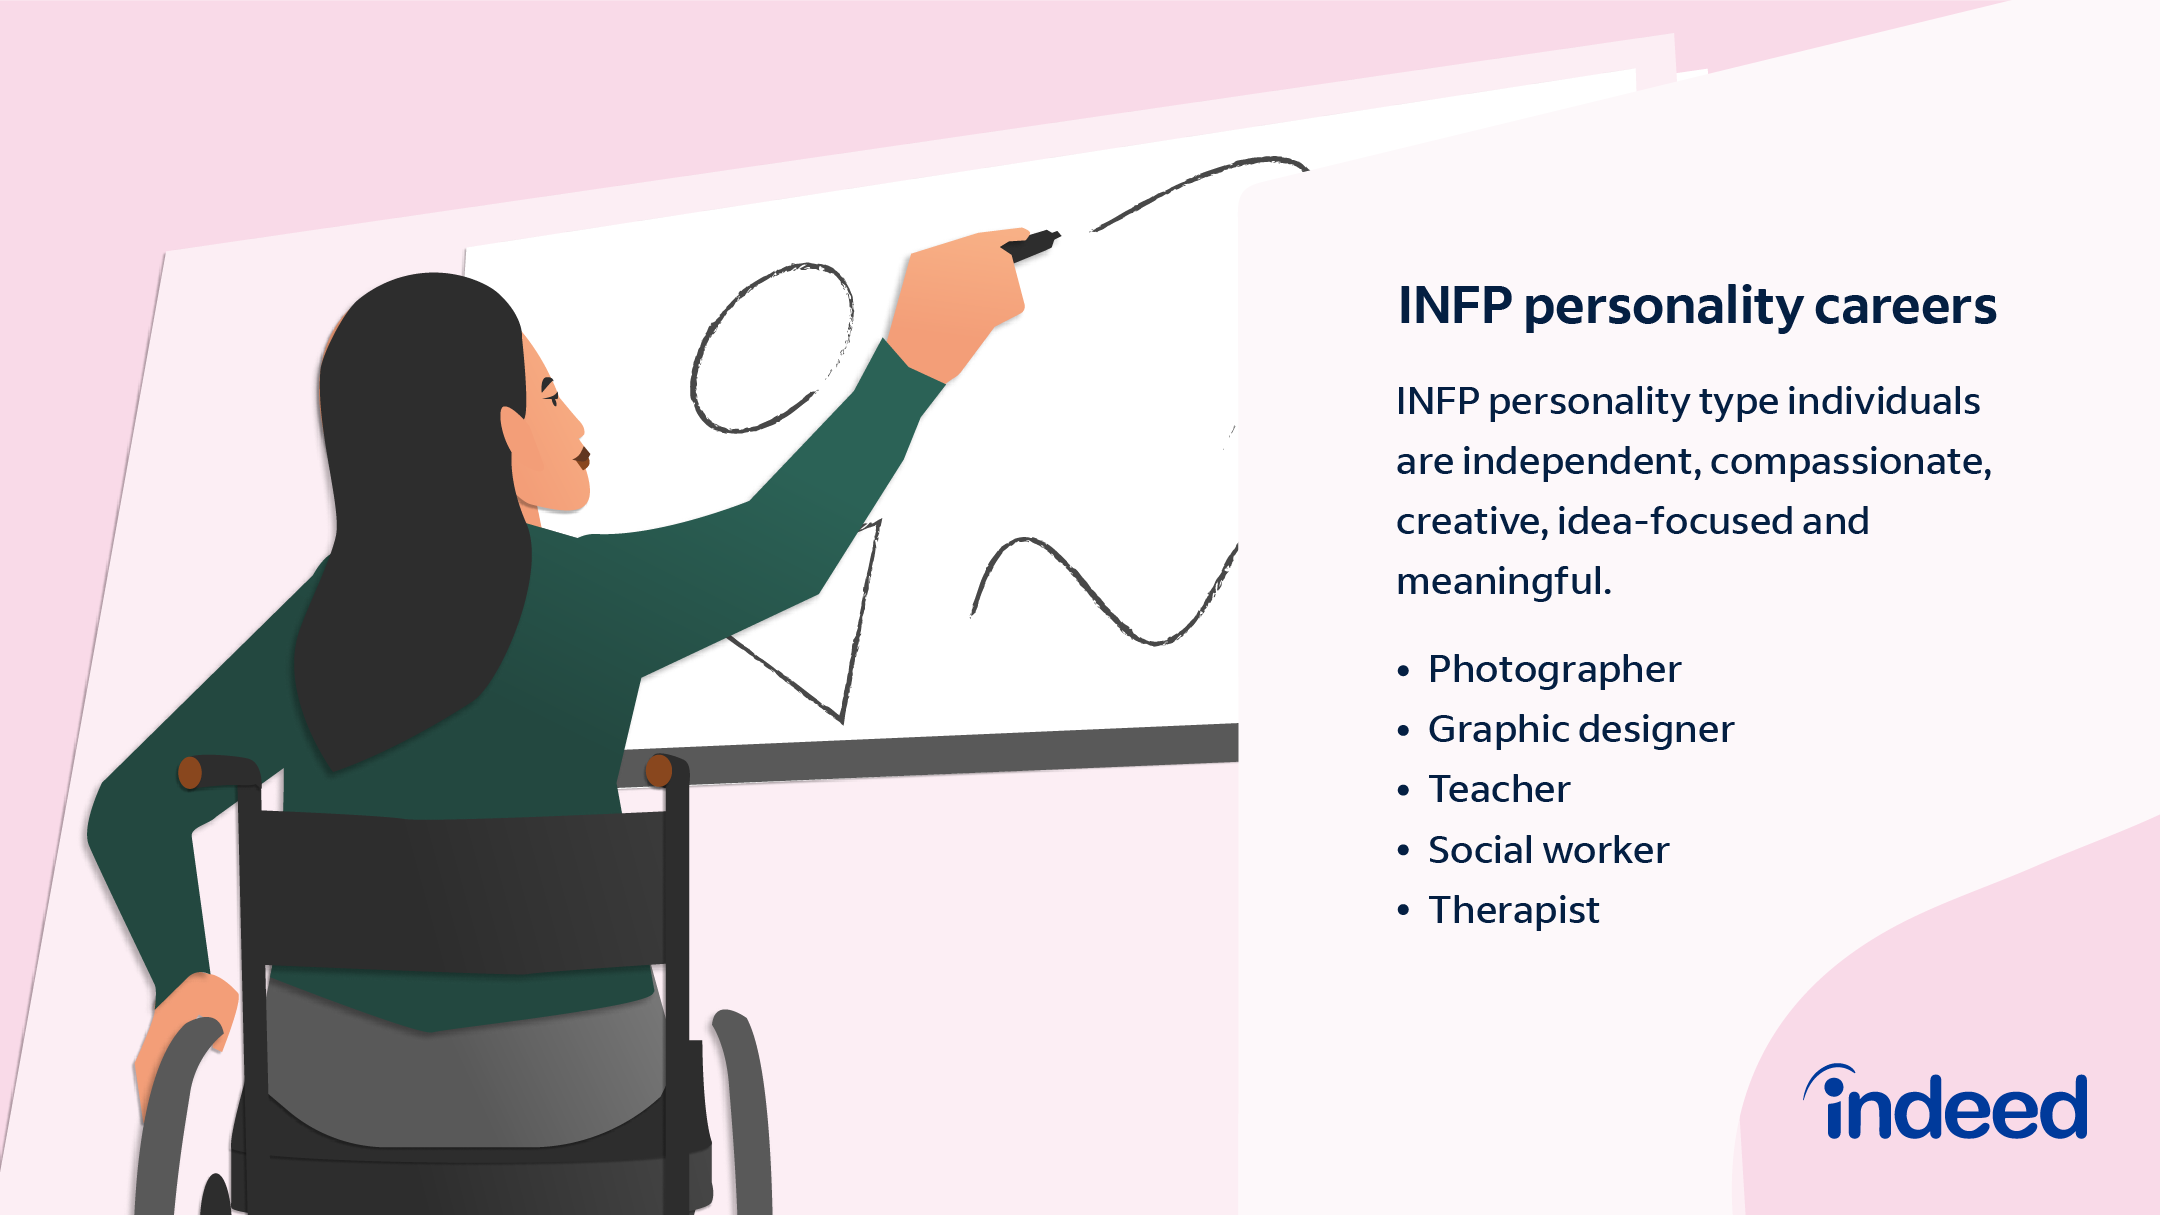 What are some examples of healthy, well developed INFPs in media? : r/infp